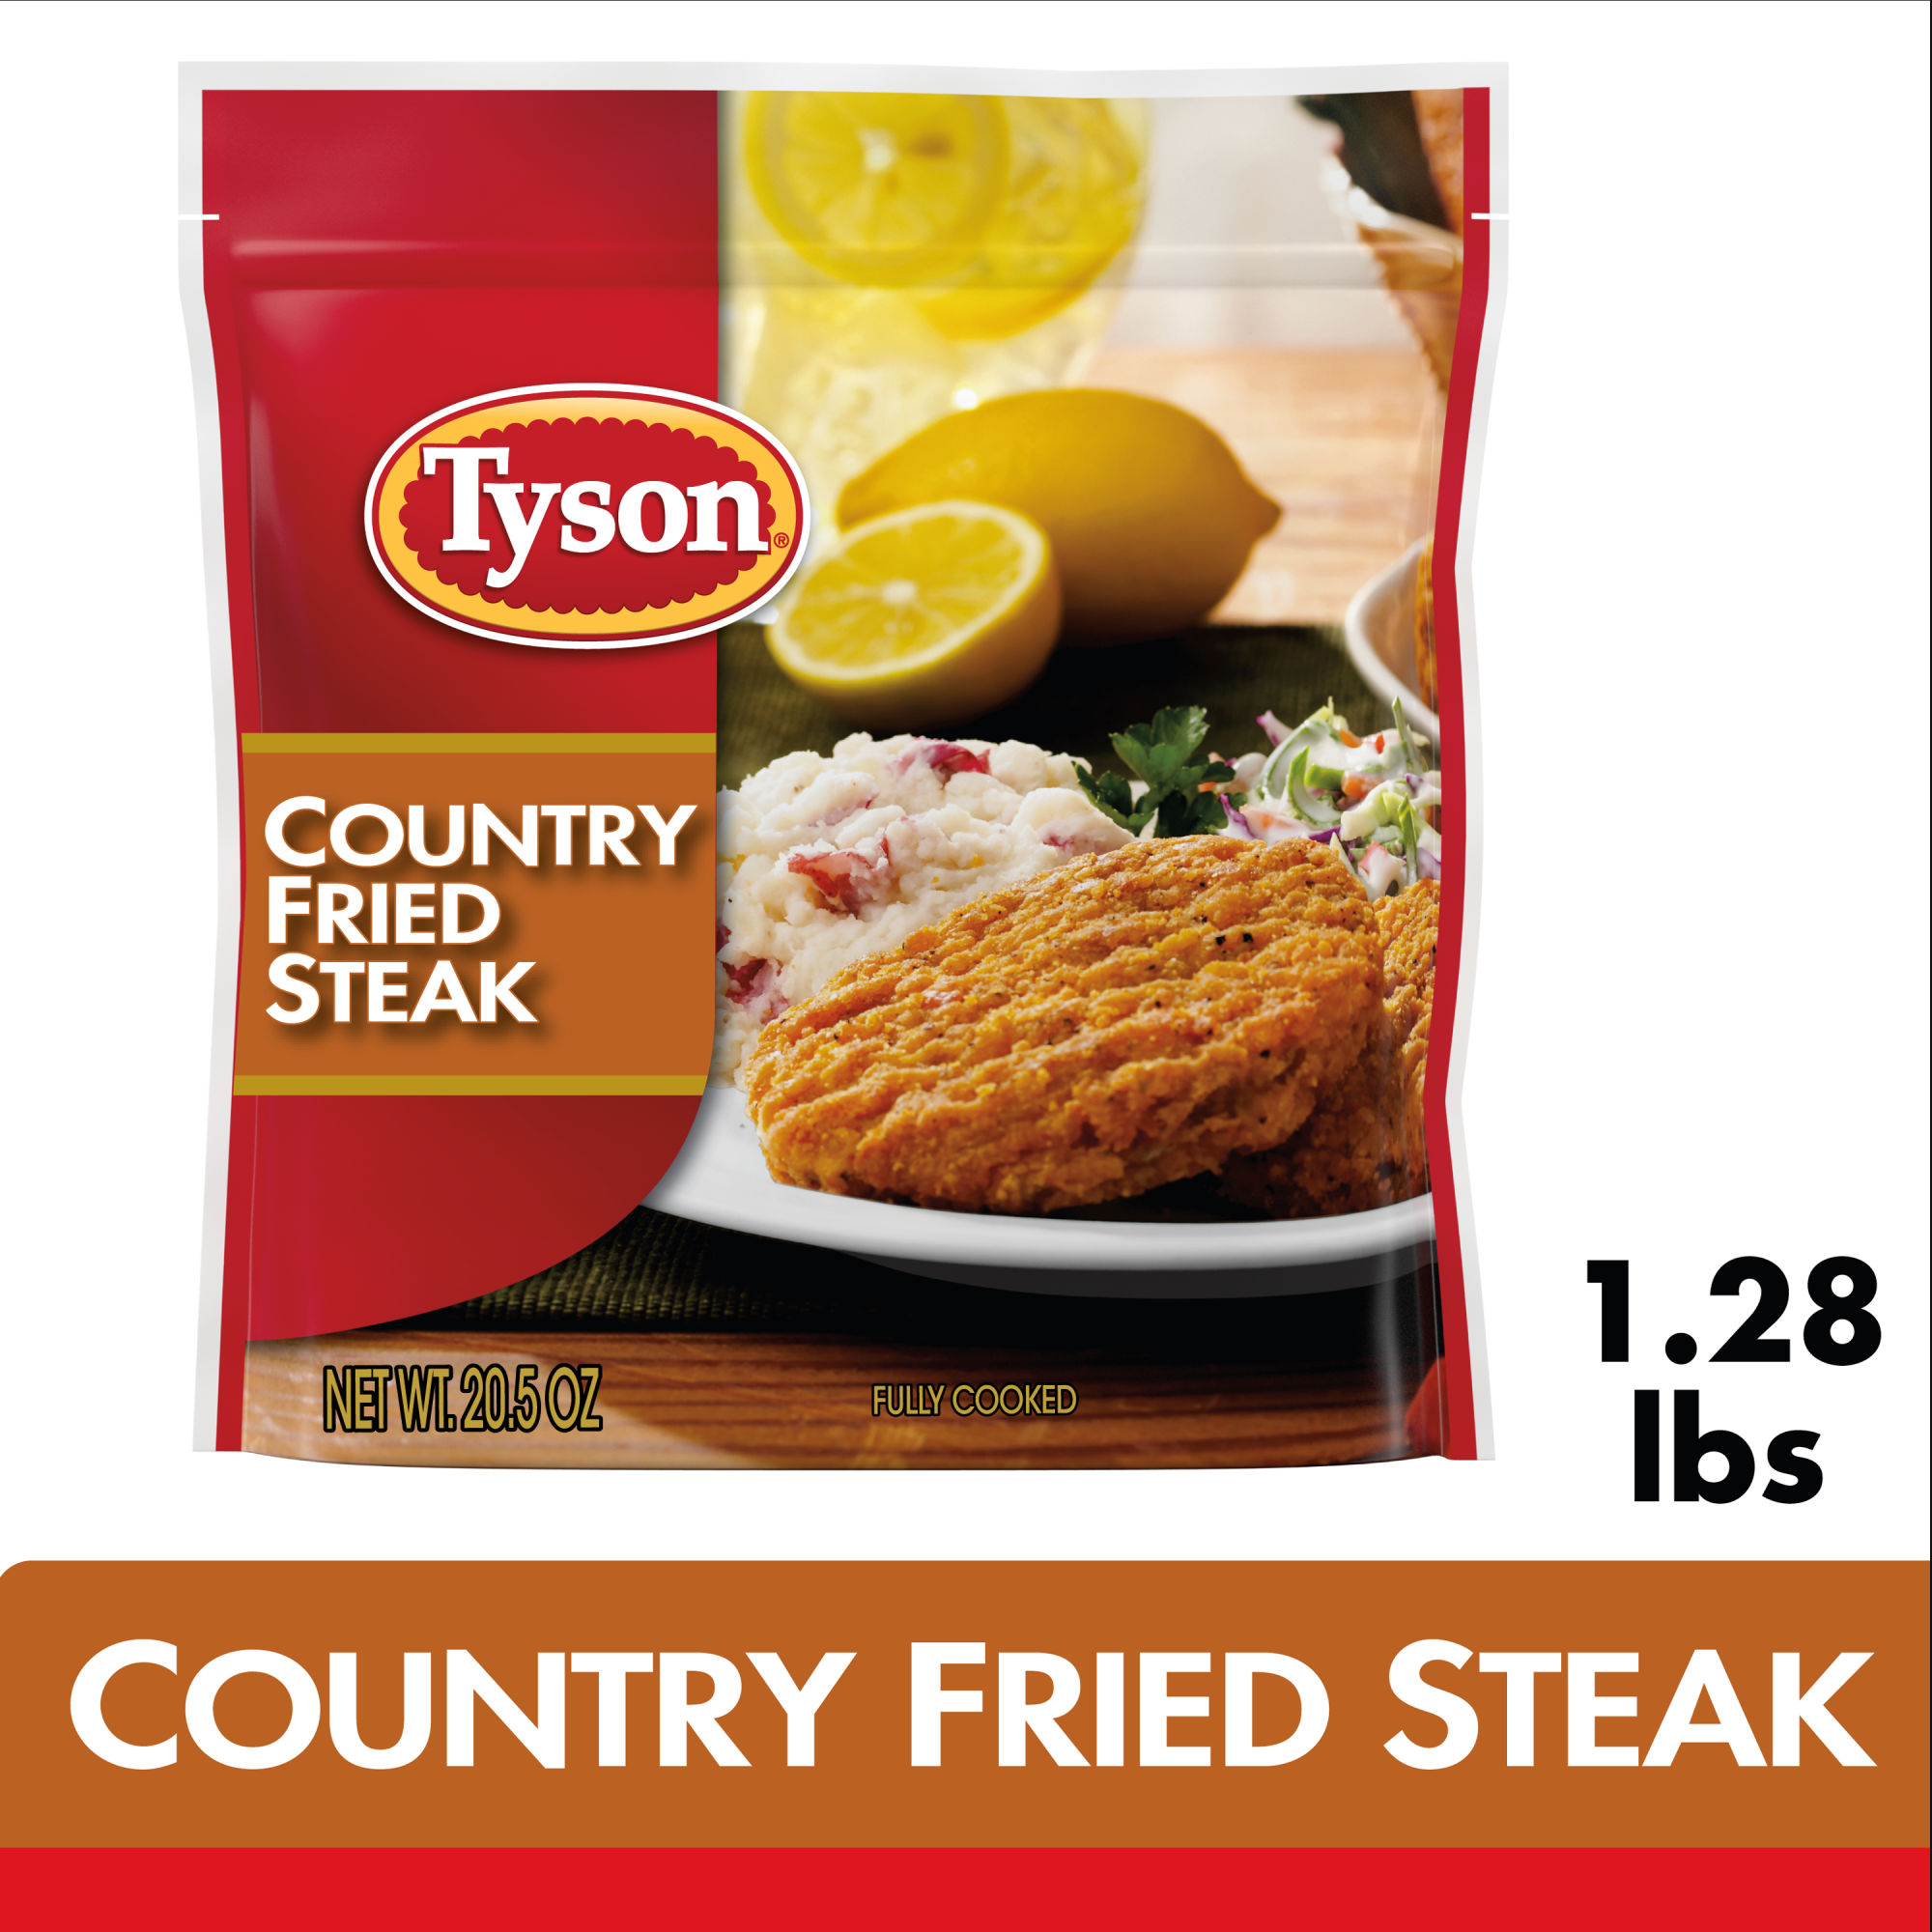 Tyson Fully Cooked Country Fried Steak Patties, 1.28 lb Bag (Frozen ...